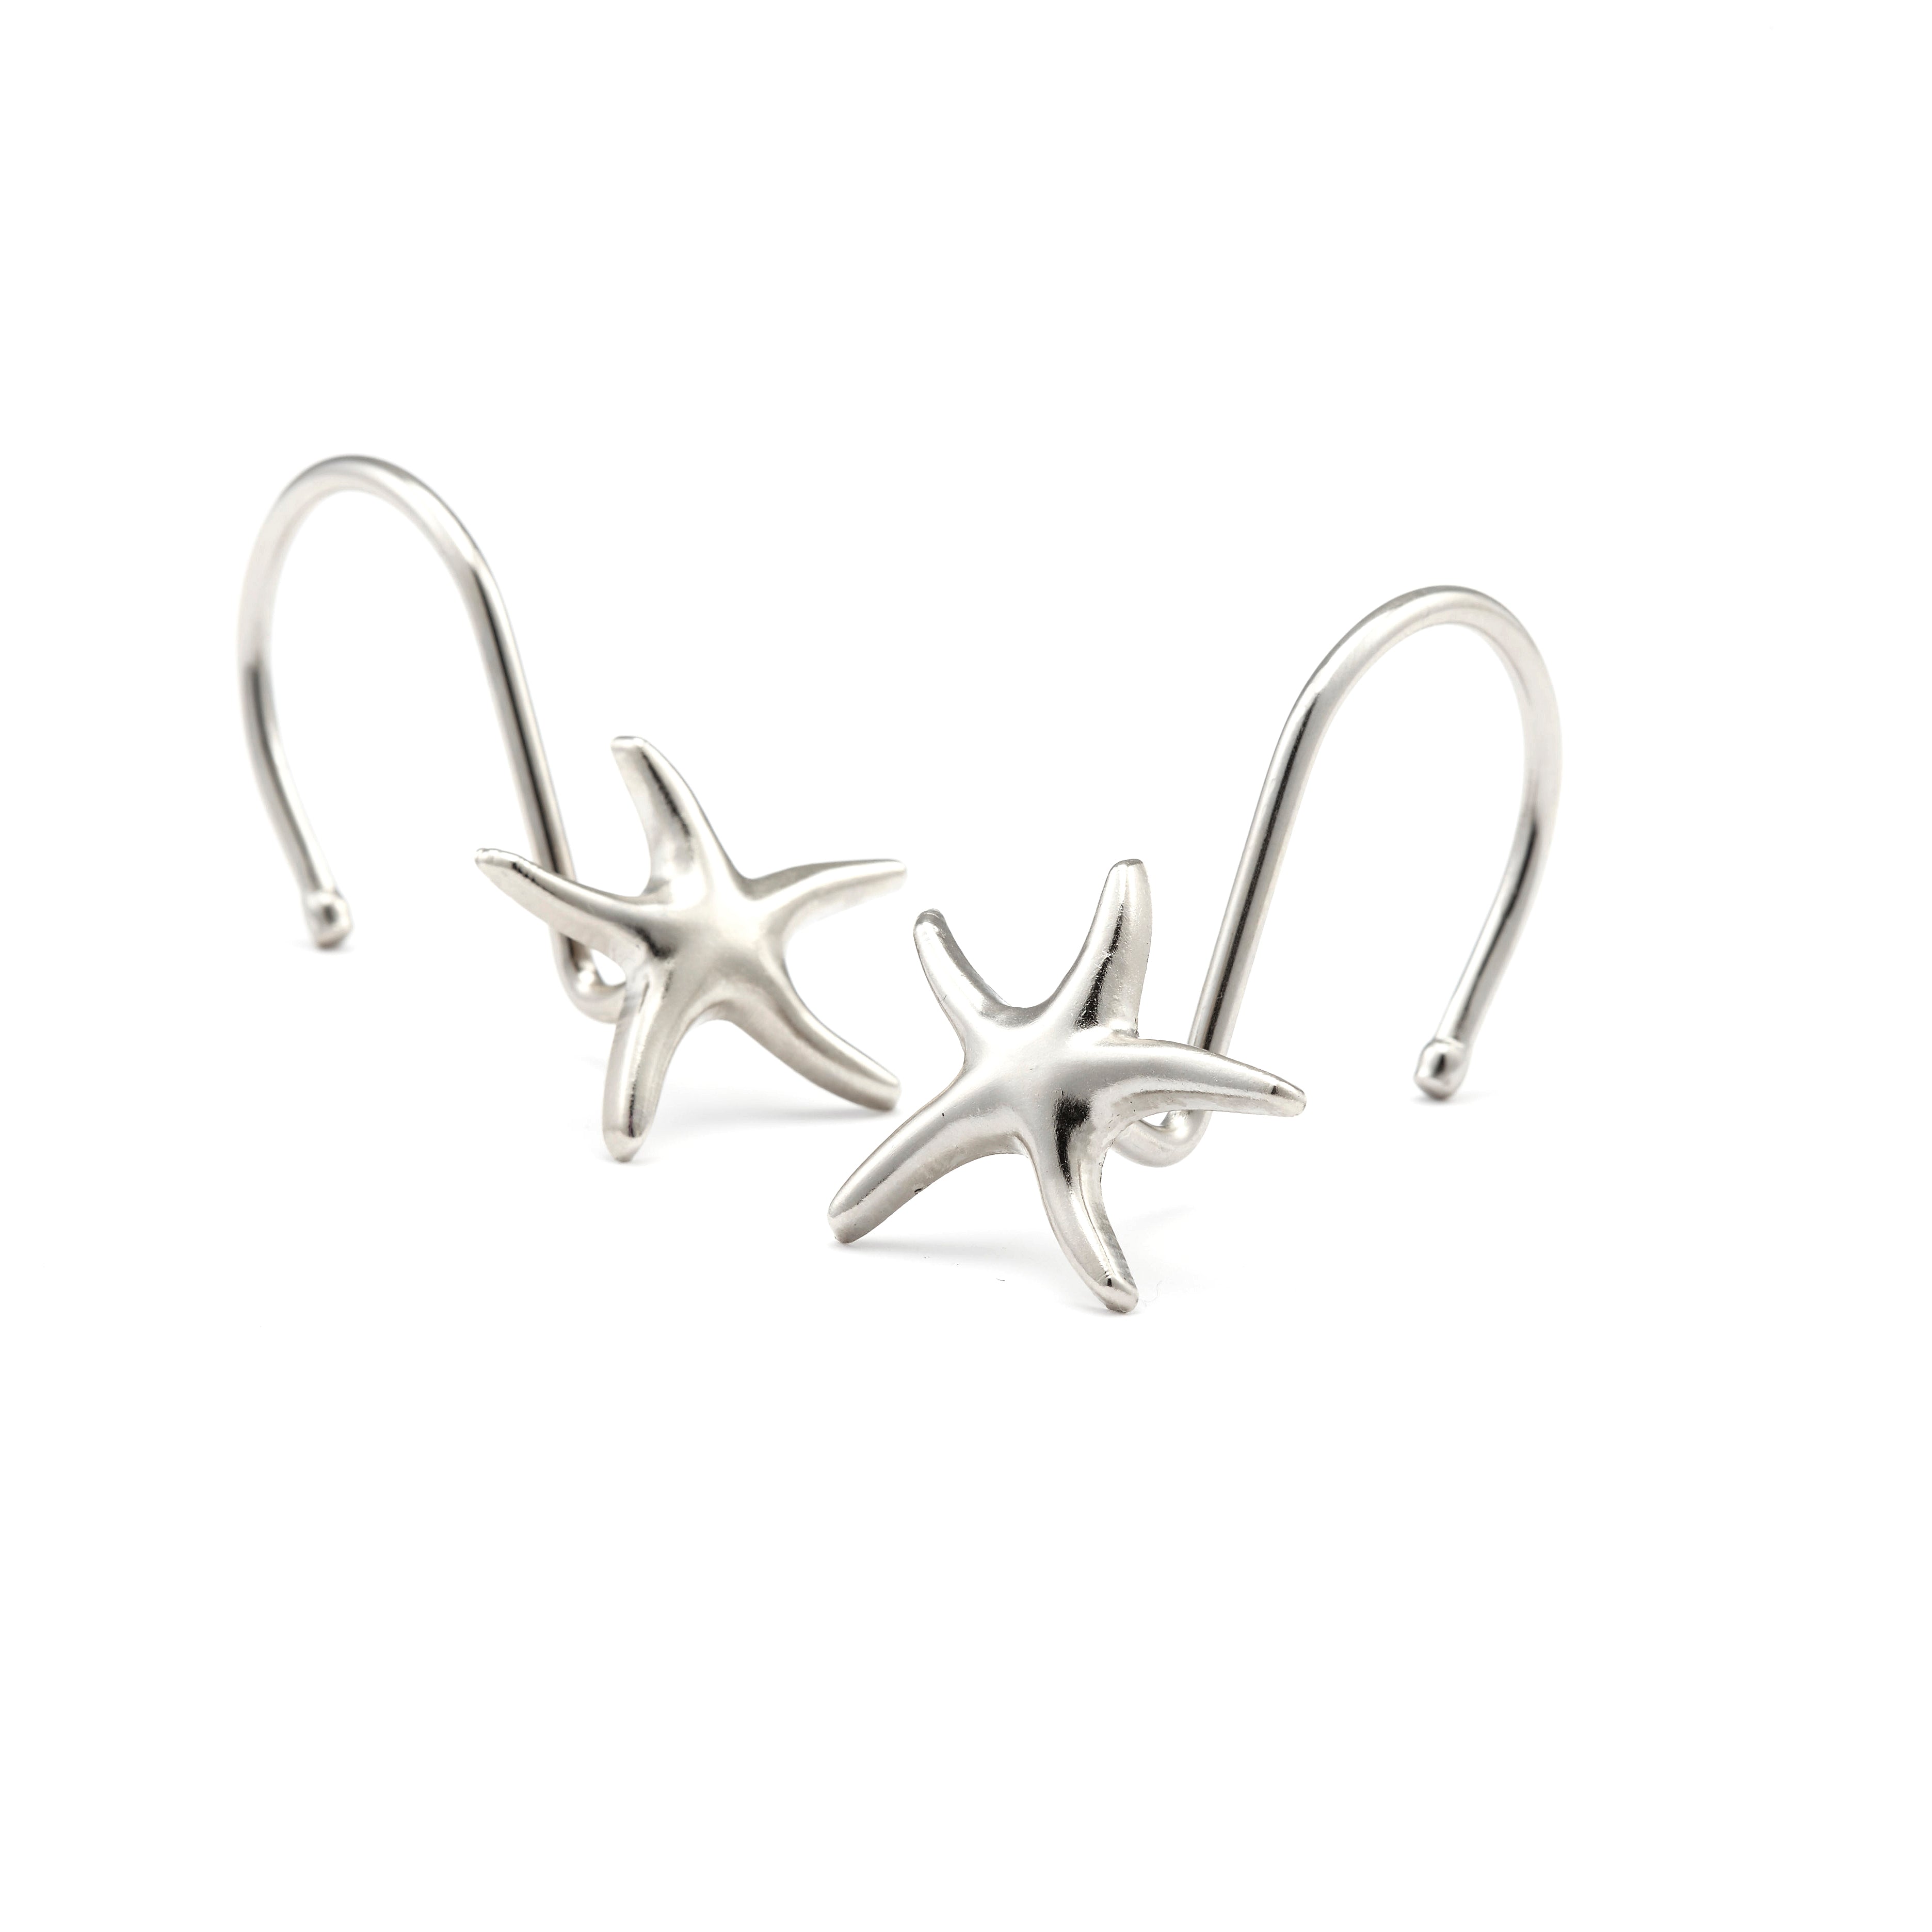 Hermosa Collection Decorative Star Shaped Silver Chrome Shower Curtain Hooks